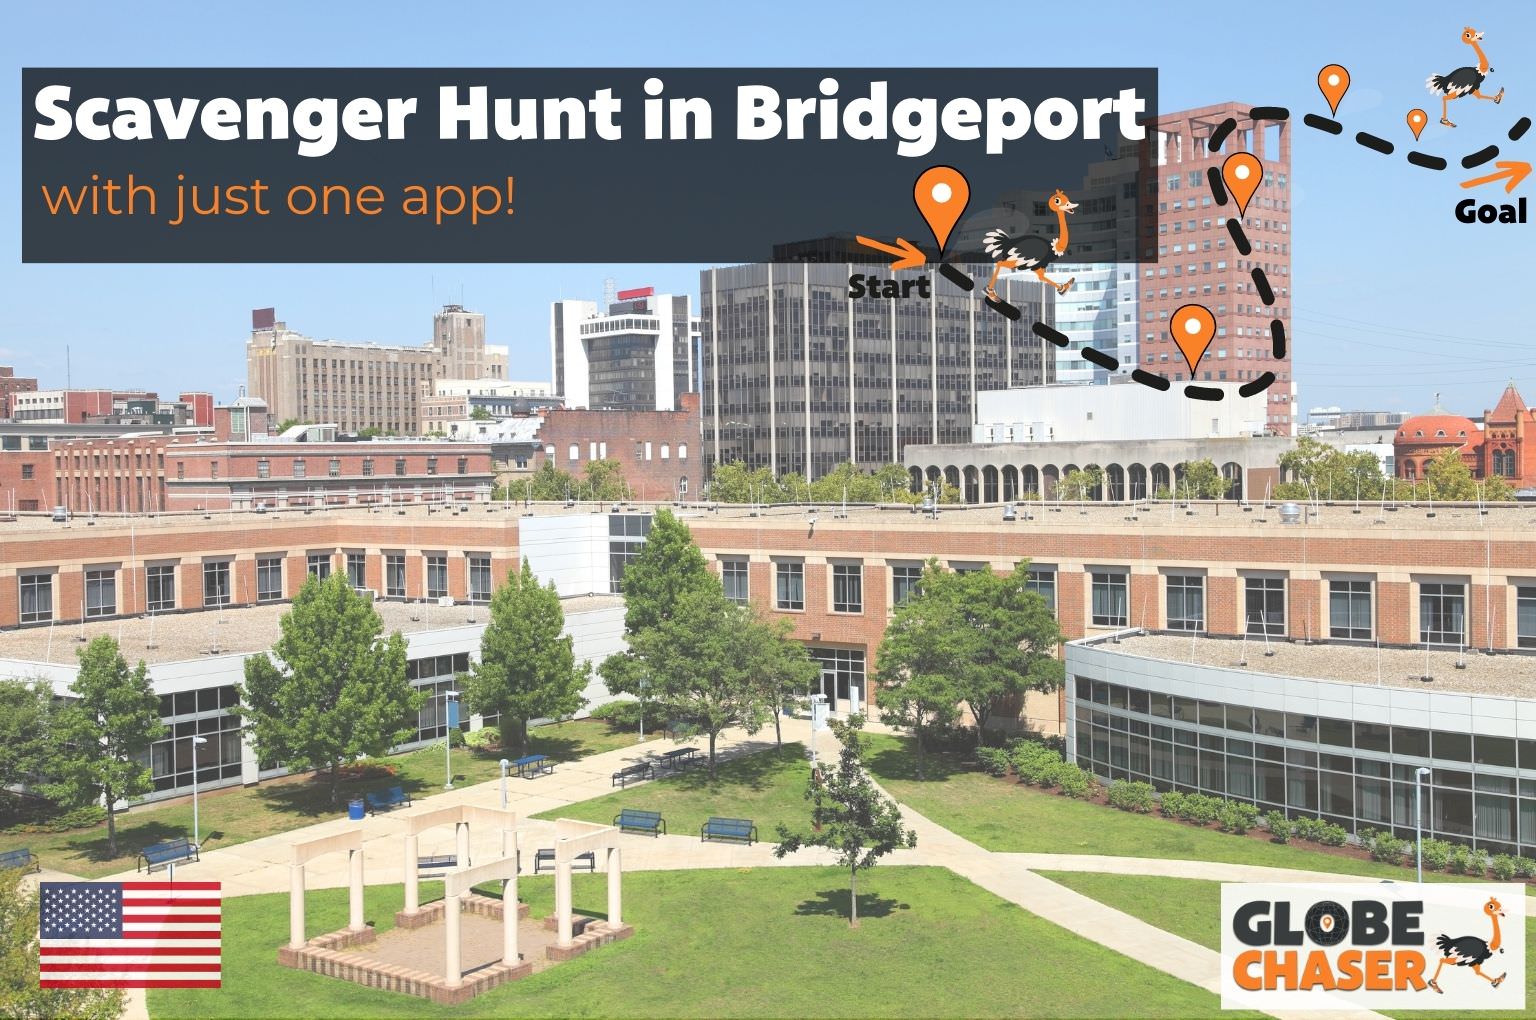 Scavenger Hunt in Bridgeport, USA - Family Activities with the Globe Chaser App for Outdoor Fun